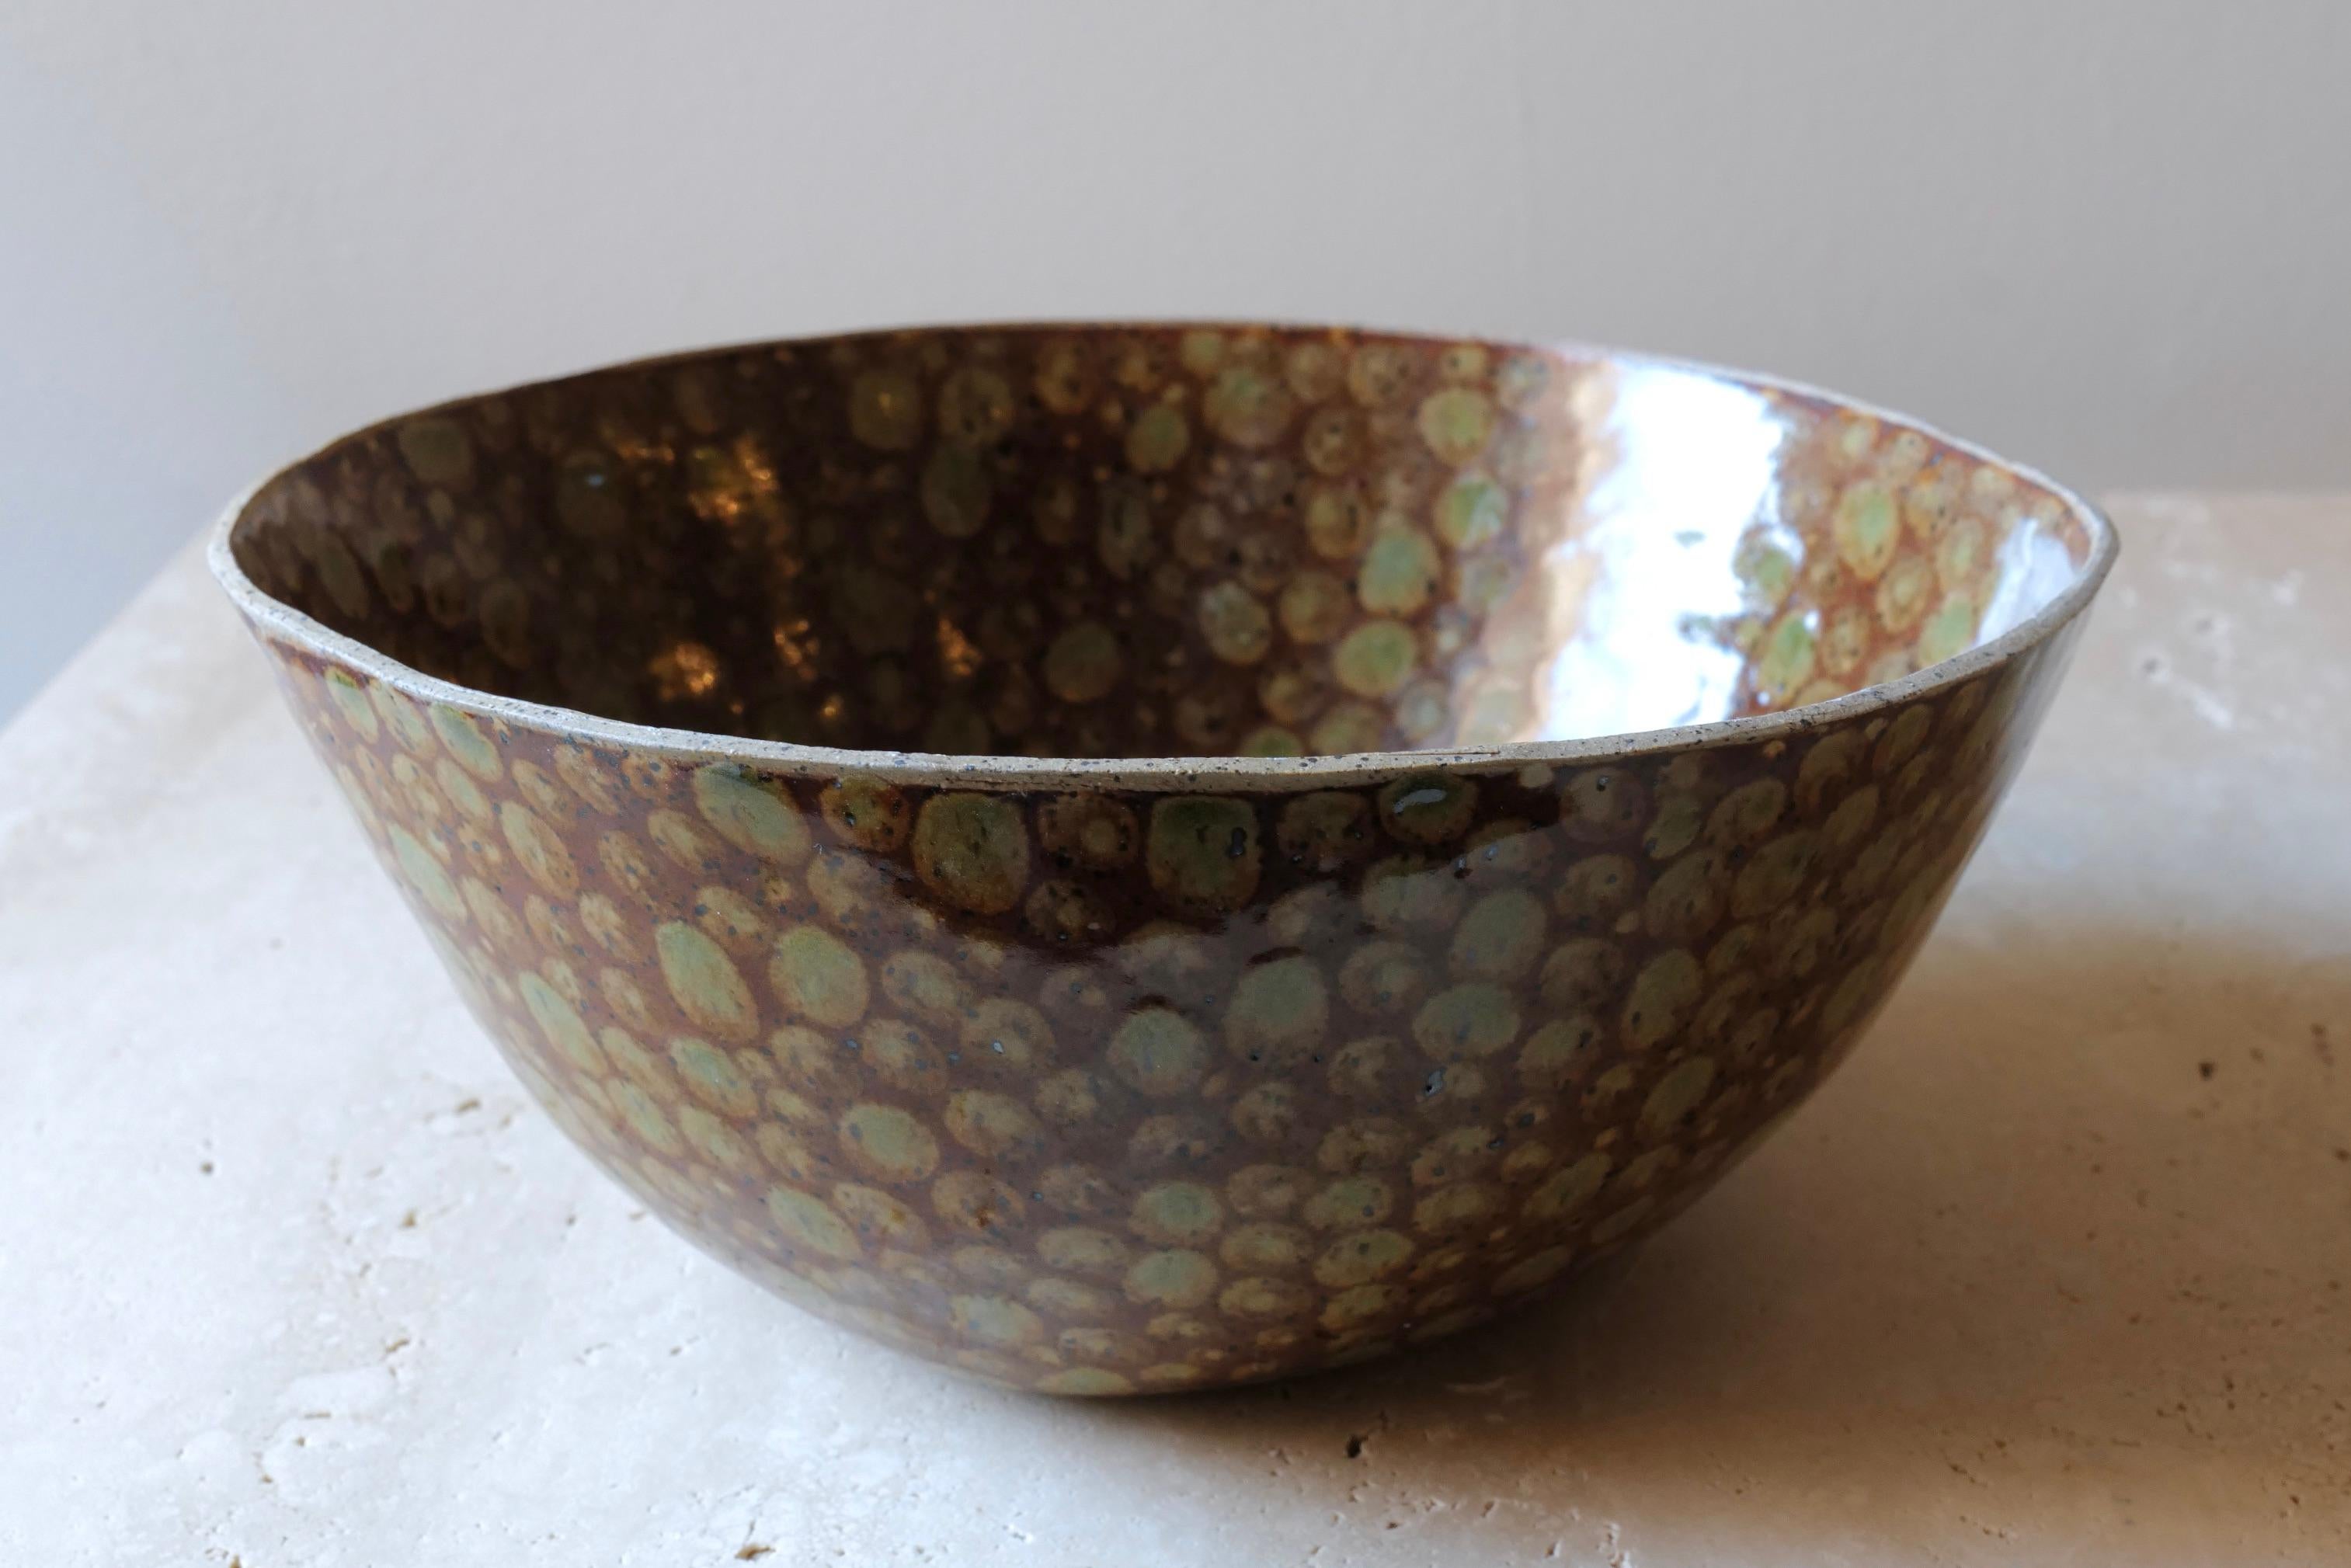 Multifunctional ceramic bowl, which functions as a soup or serving bowl as well as for fruit, as a centerpiece on a table. Each bowl is made from slabs that are pressed into clay molds by hand. Made from brown clay that develops a beautiful speckled